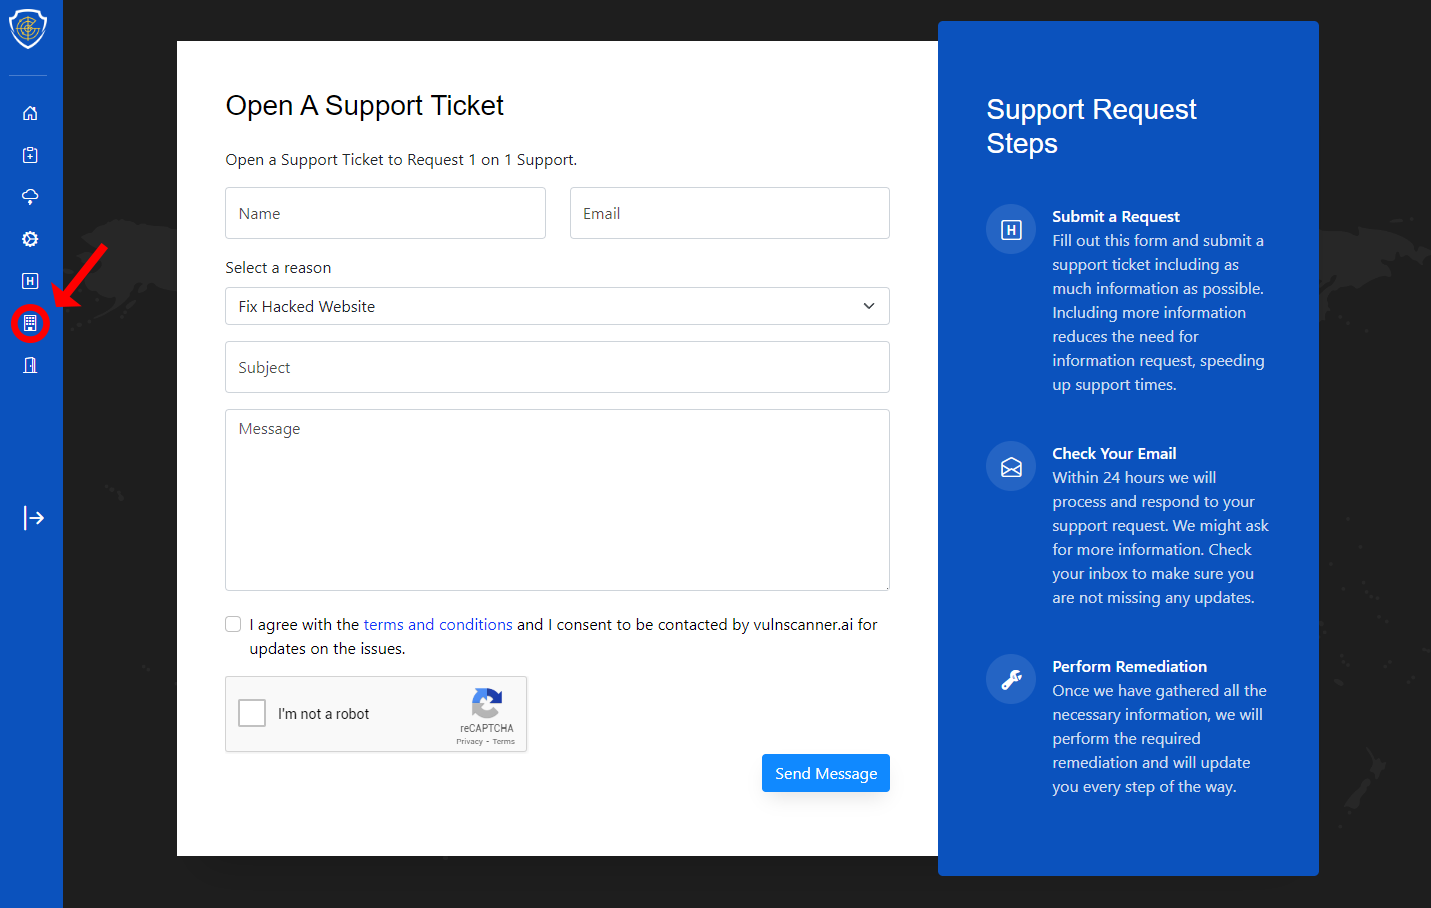 Support form image